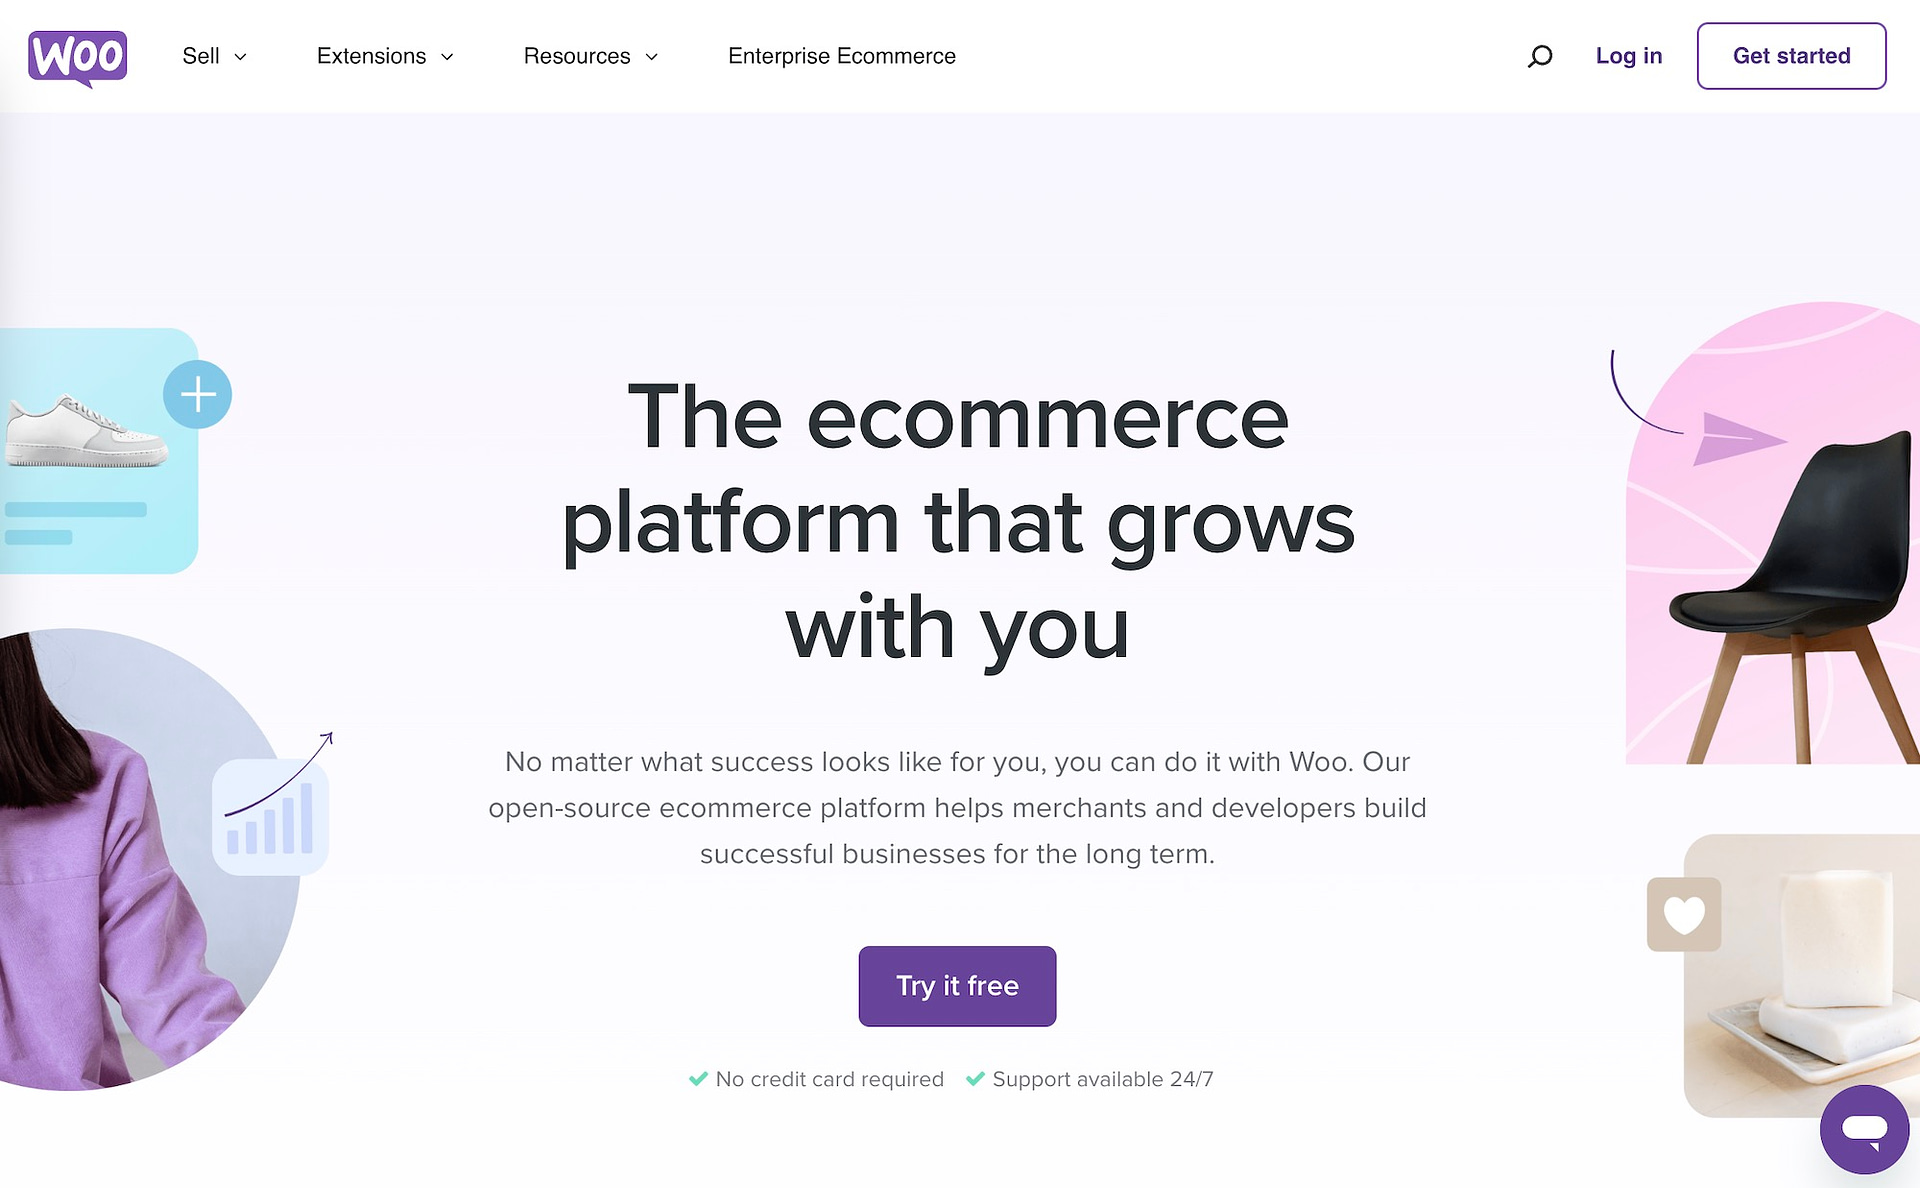 Our GeneratePress review showed that WooCommerce is compatible.